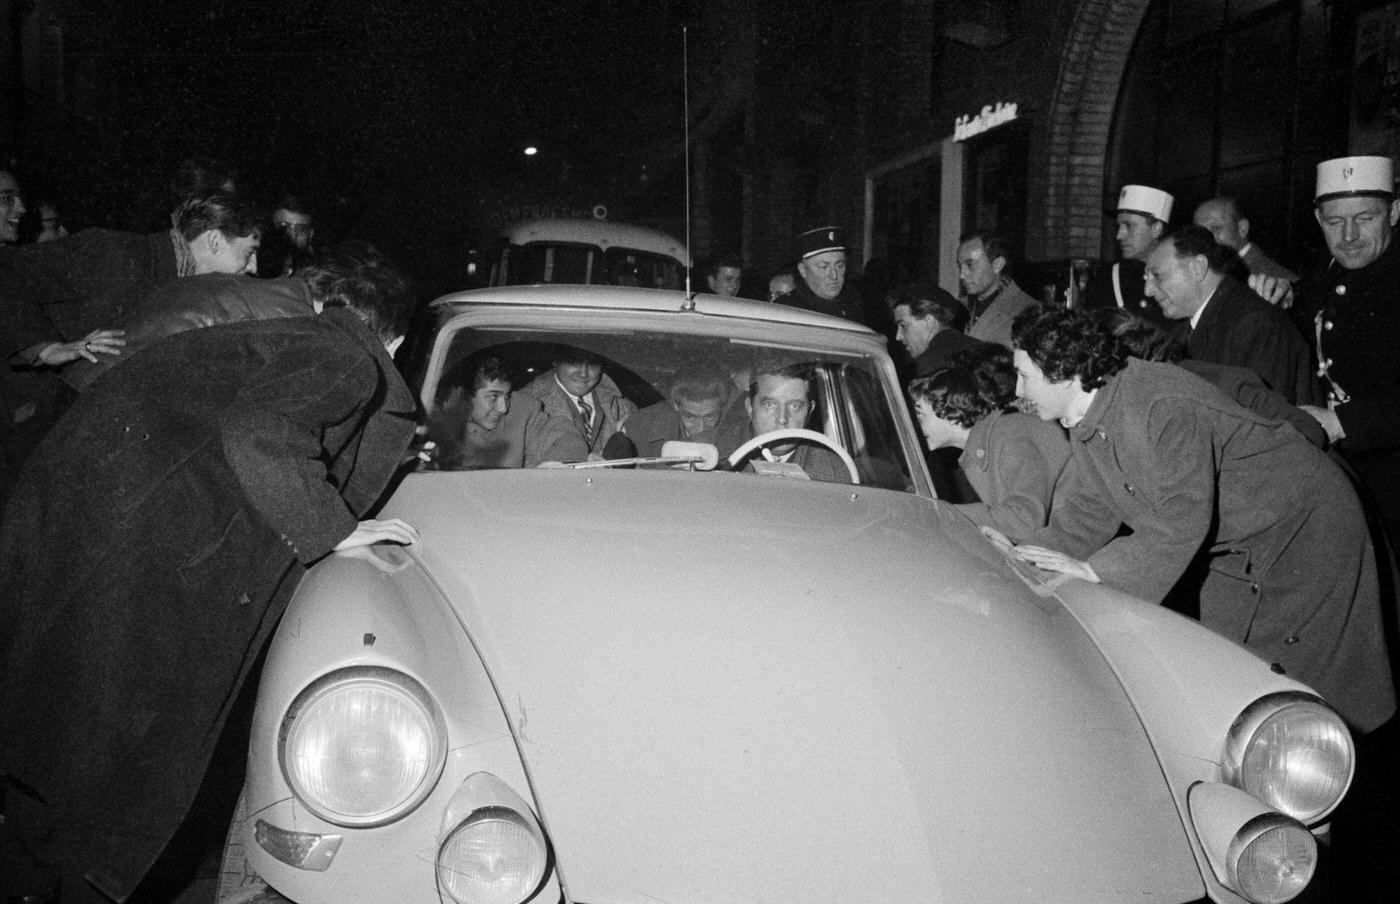 Singer Paul Anka, 17, getting into a Citroën DS outside Olympia in Paris in 1958.